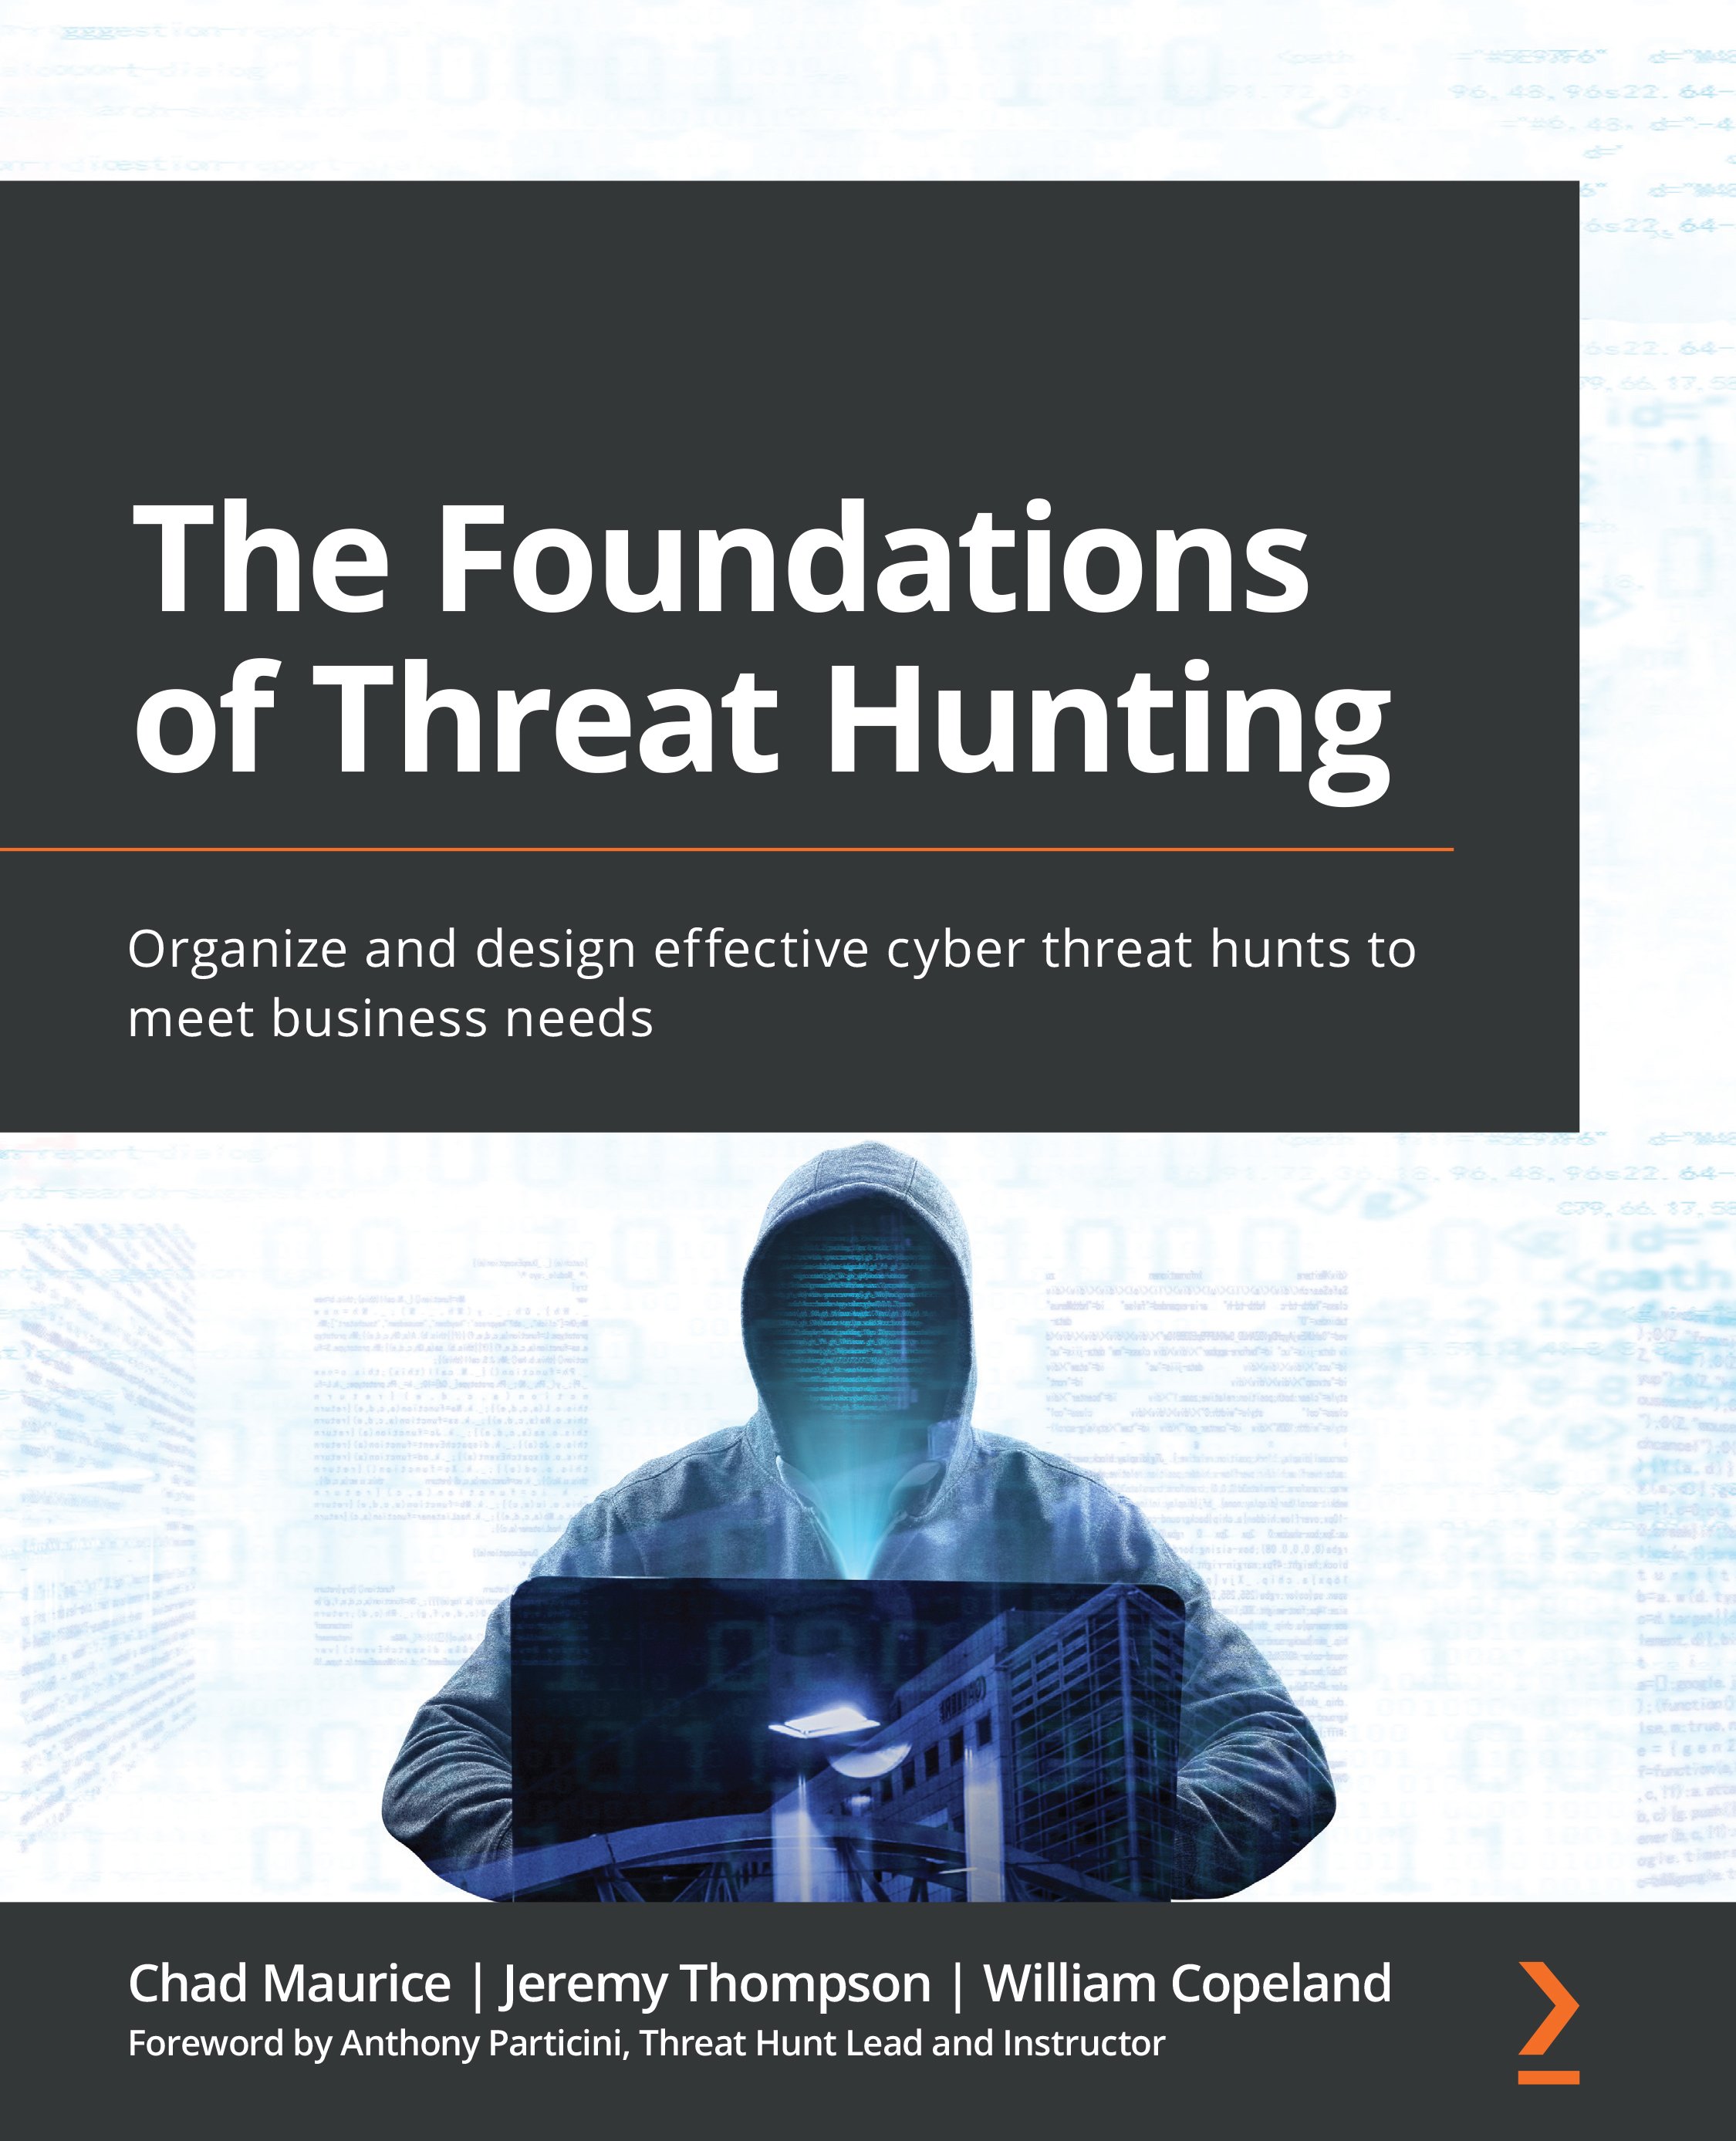 The Foundations of Threat Hunting